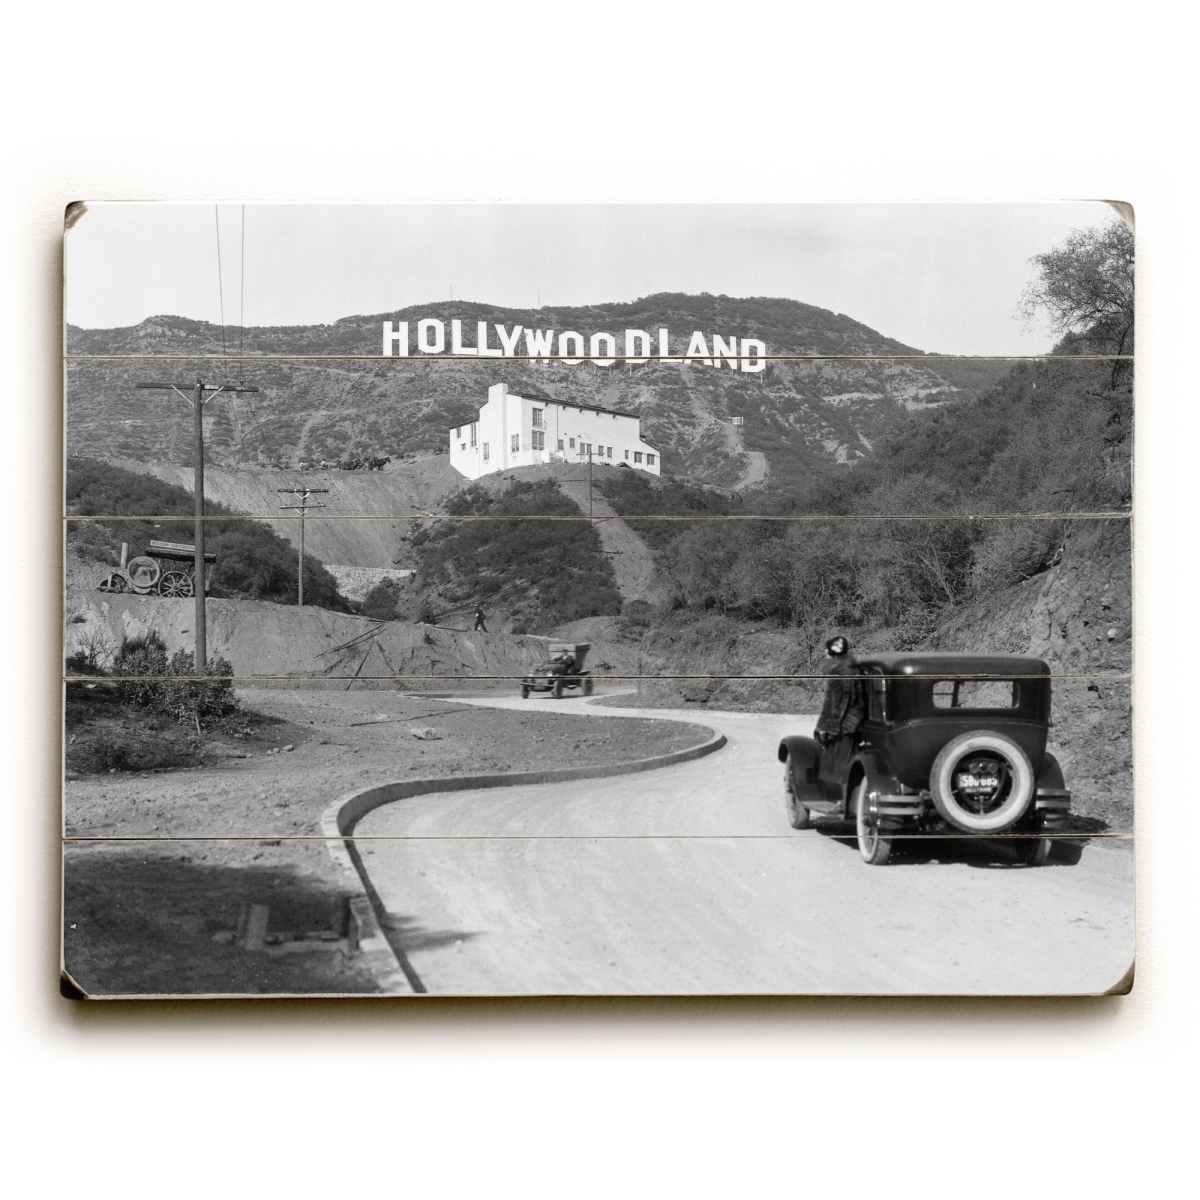 0003-2025-31 25 X 34 In. Hollywood Los Angeles C. 1924 Planked Wood Wall Decor By Underwood Photo Archive